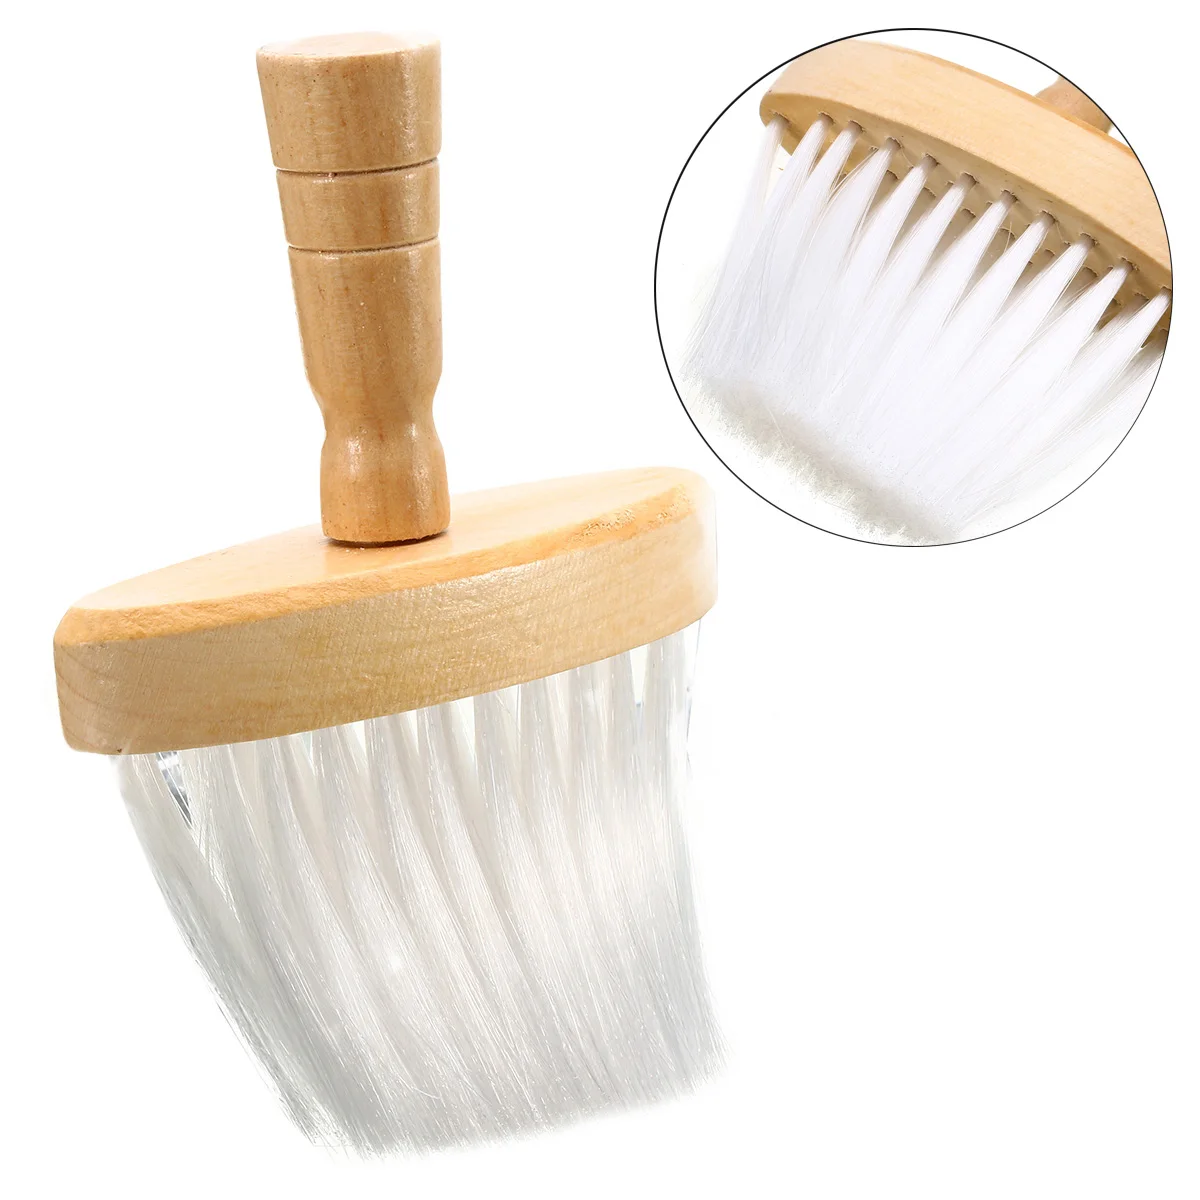 Mayitr 1pc Wide Soft Neck Duster Wooden Handle Hairdressing Hair Cutting Brush For Salon Barber Hairdresser Styling Tools